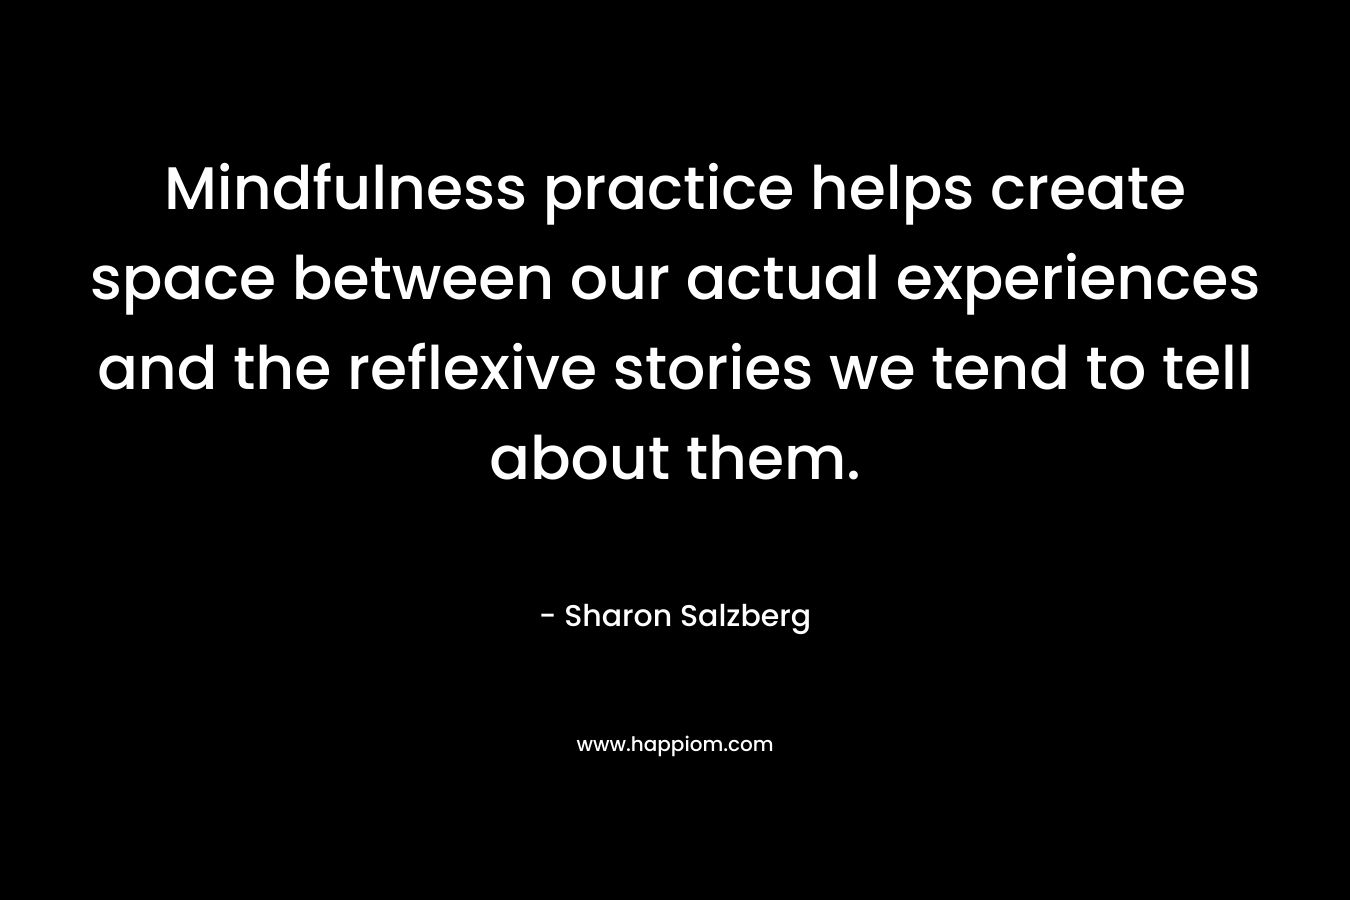 Mindfulness practice helps create space between our actual experiences and the reflexive stories we tend to tell about them.